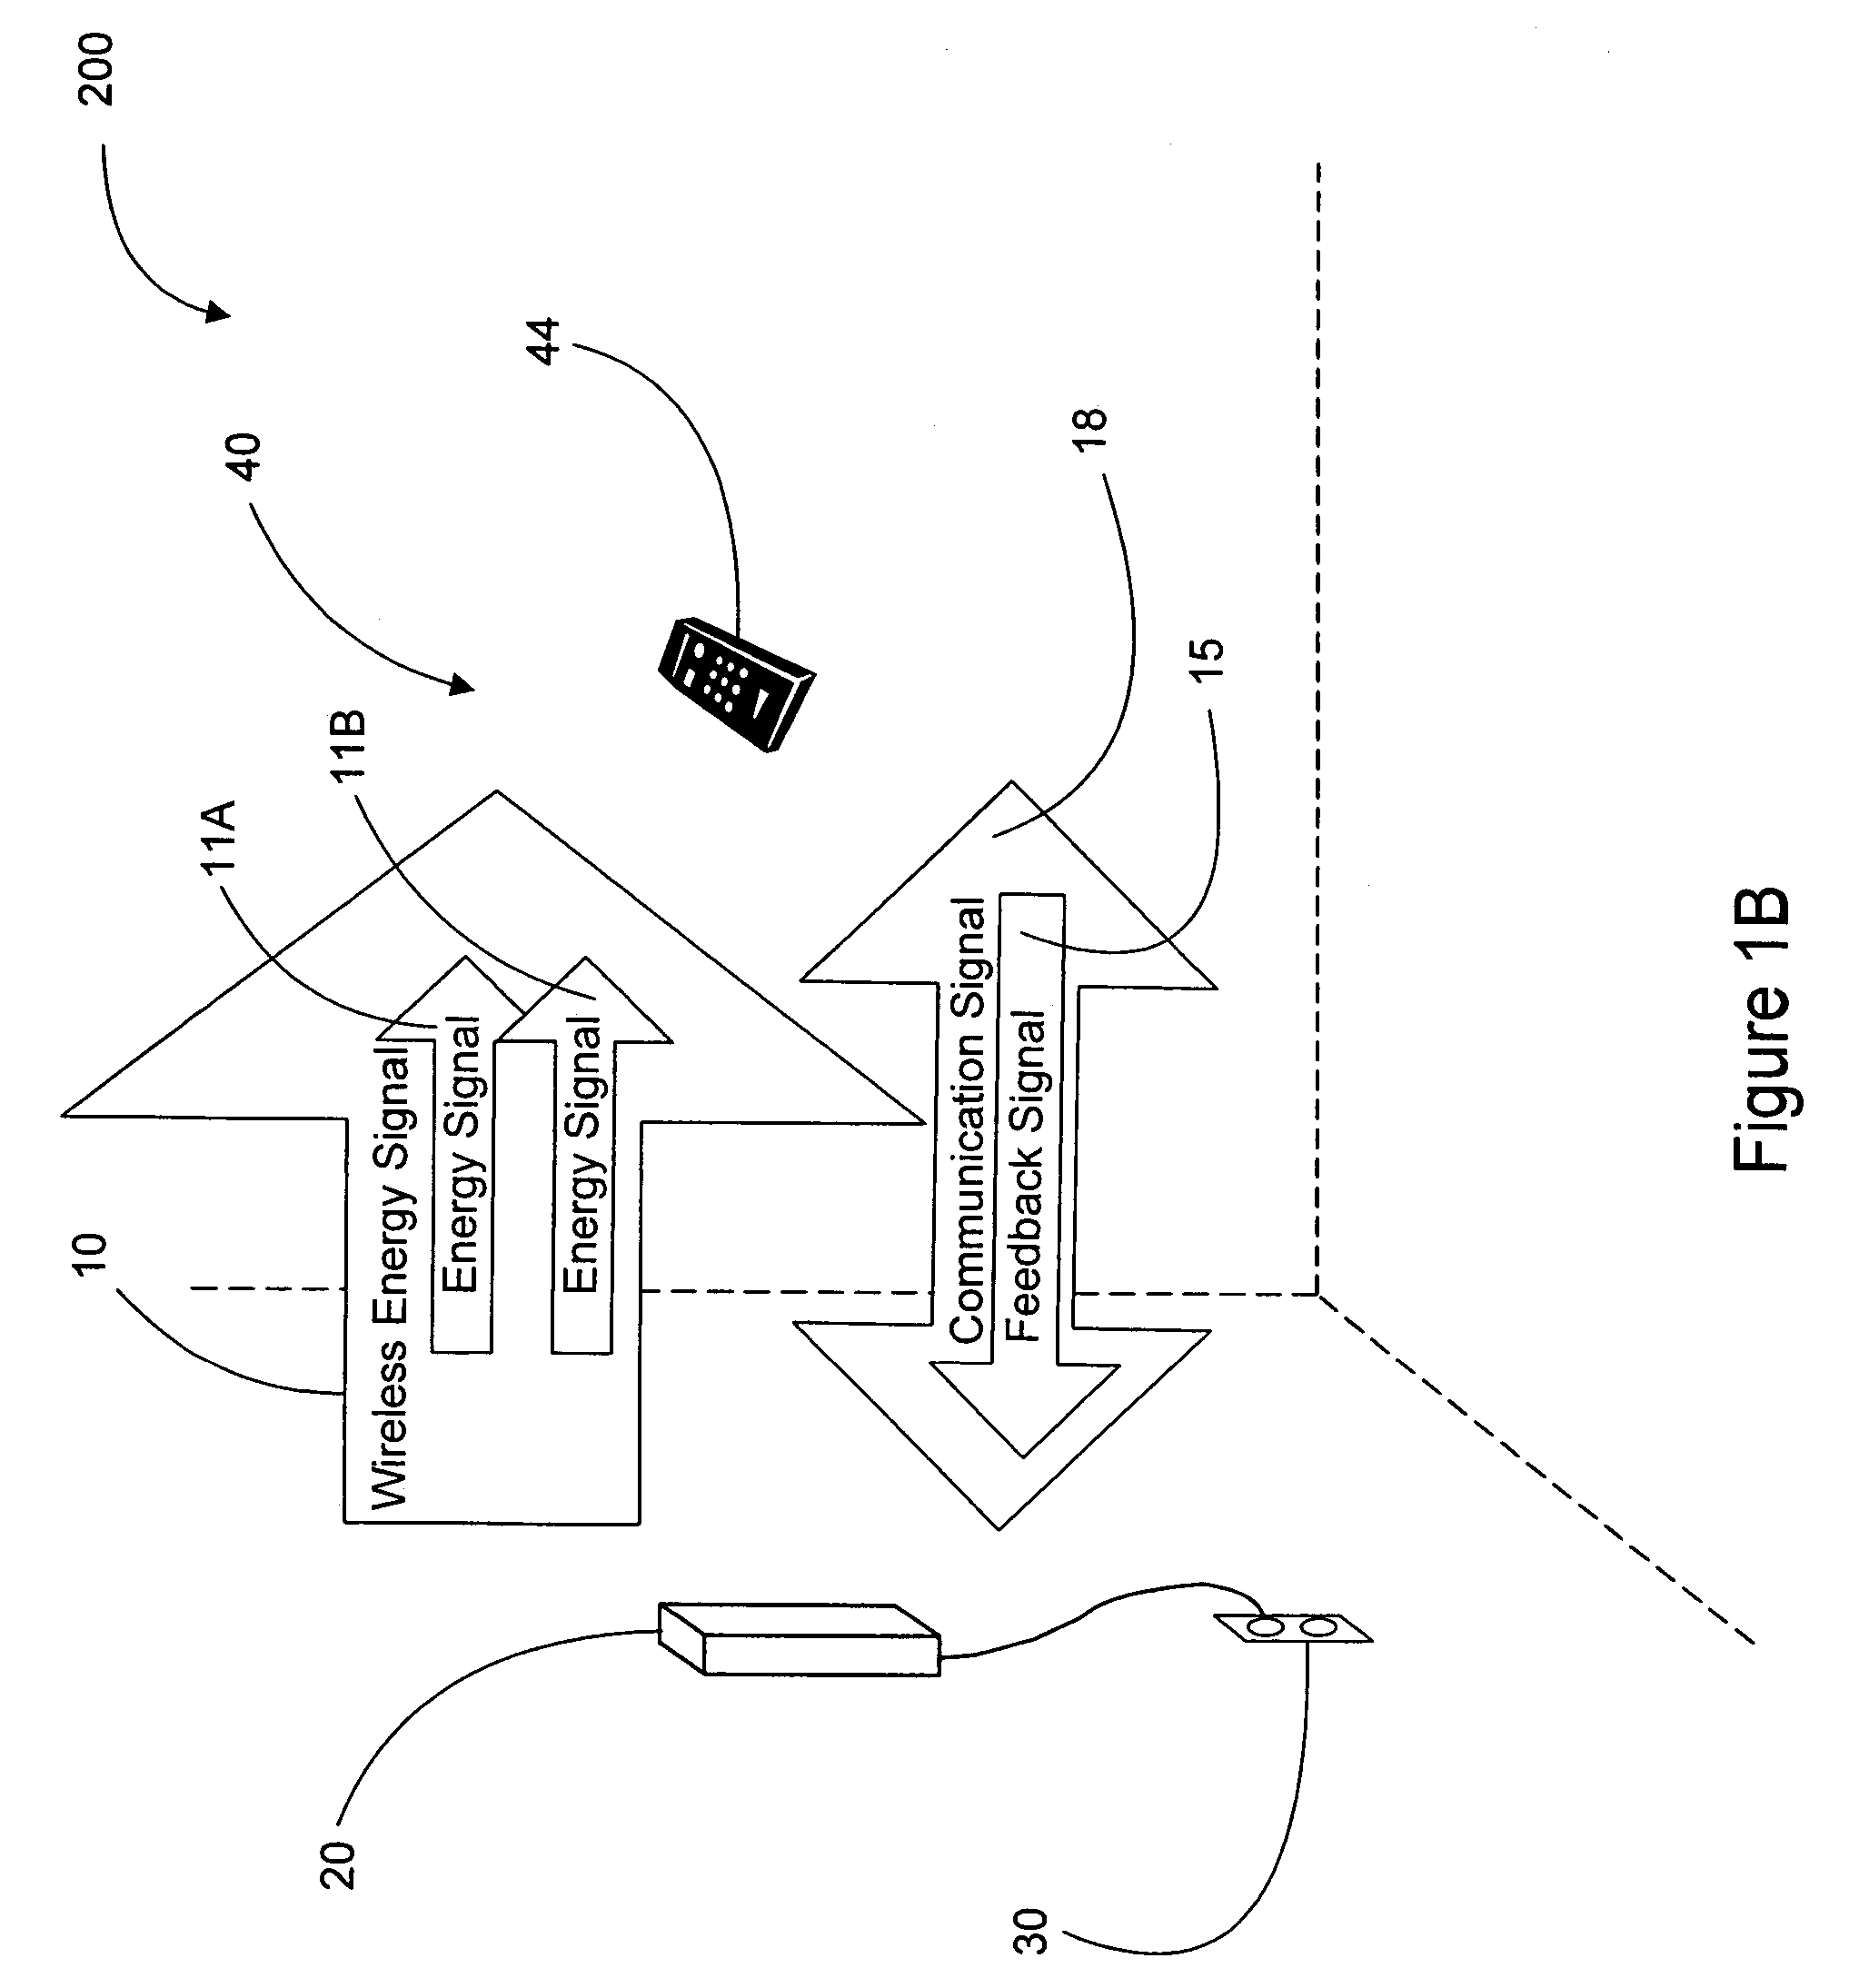 Remote power charging of electronic devices